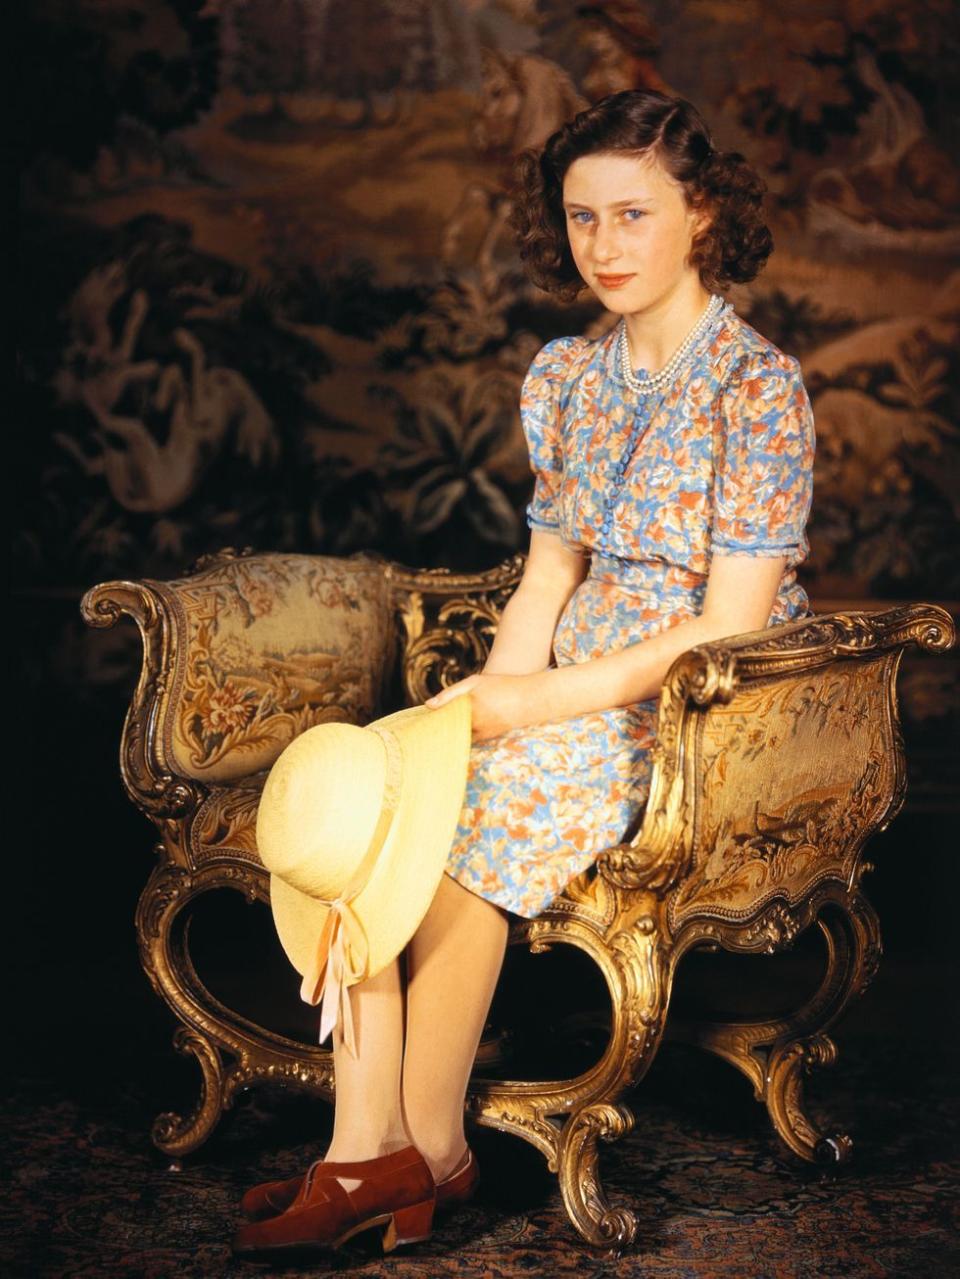 <p>Princess Margaret, seated and wearing a multi-colored dress and holding a straw hat.</p>